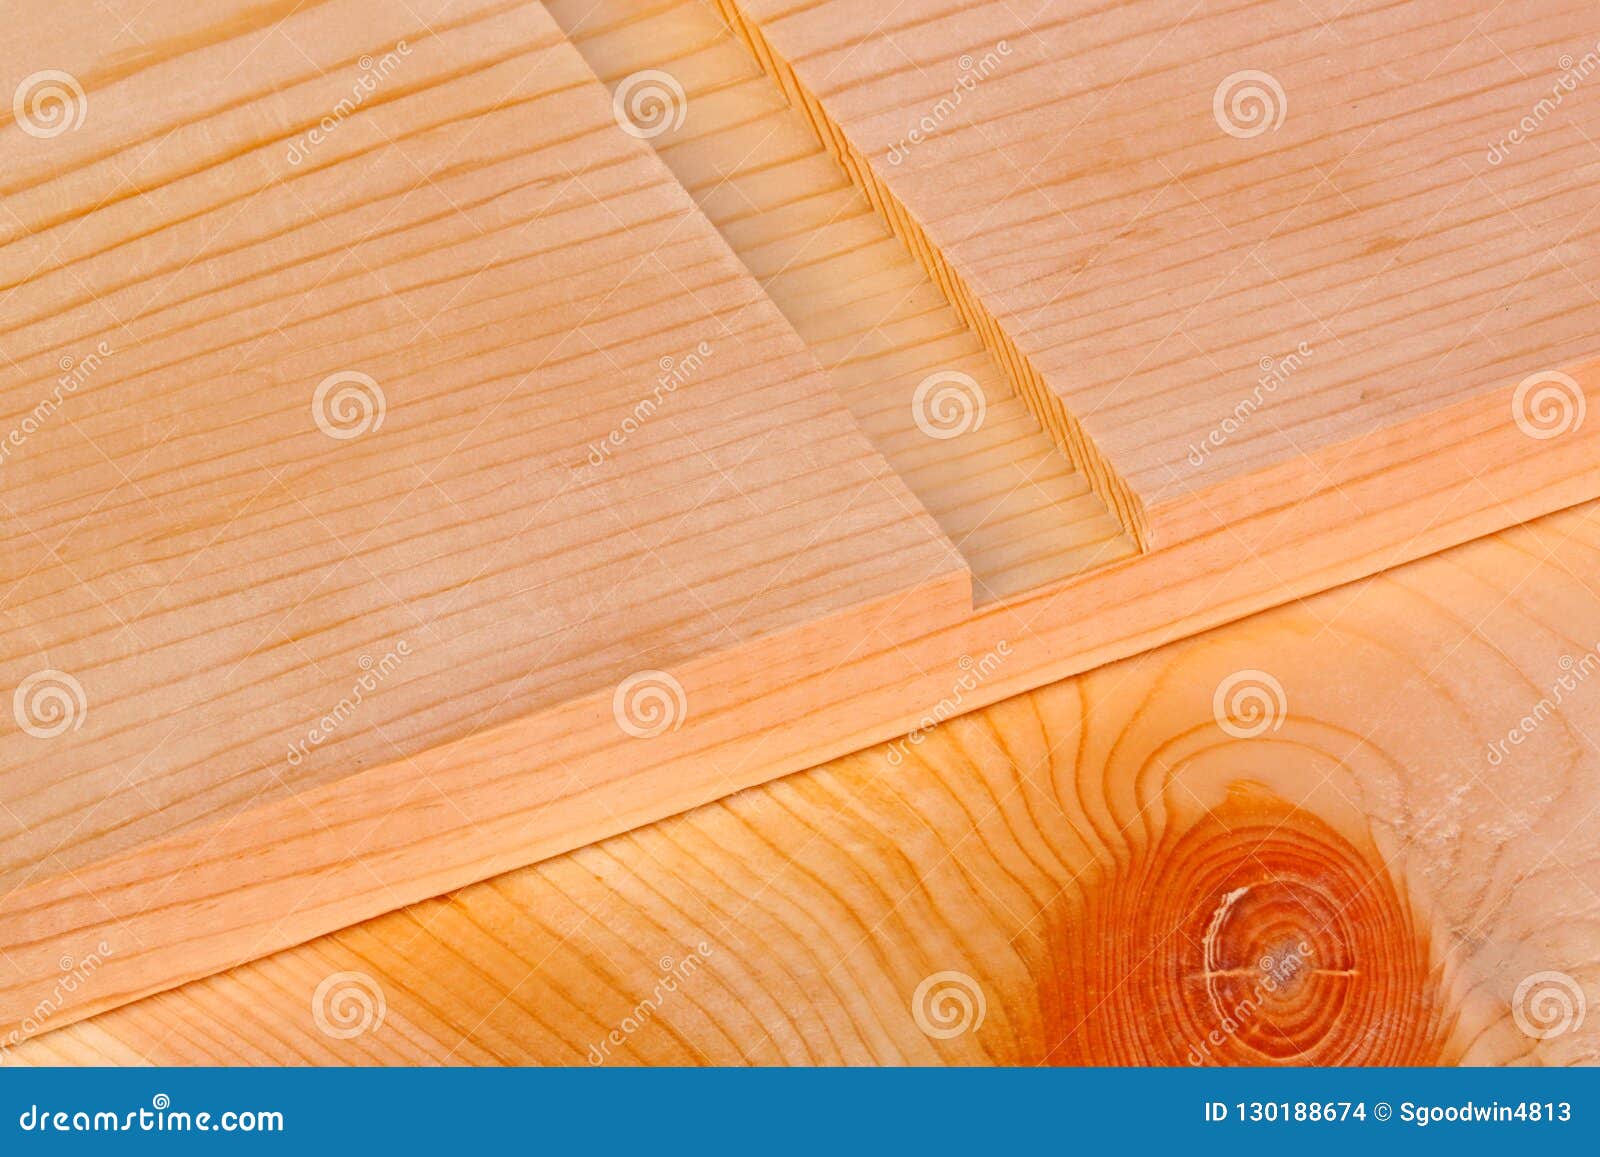 close-up of a board with a woodworking dado groove